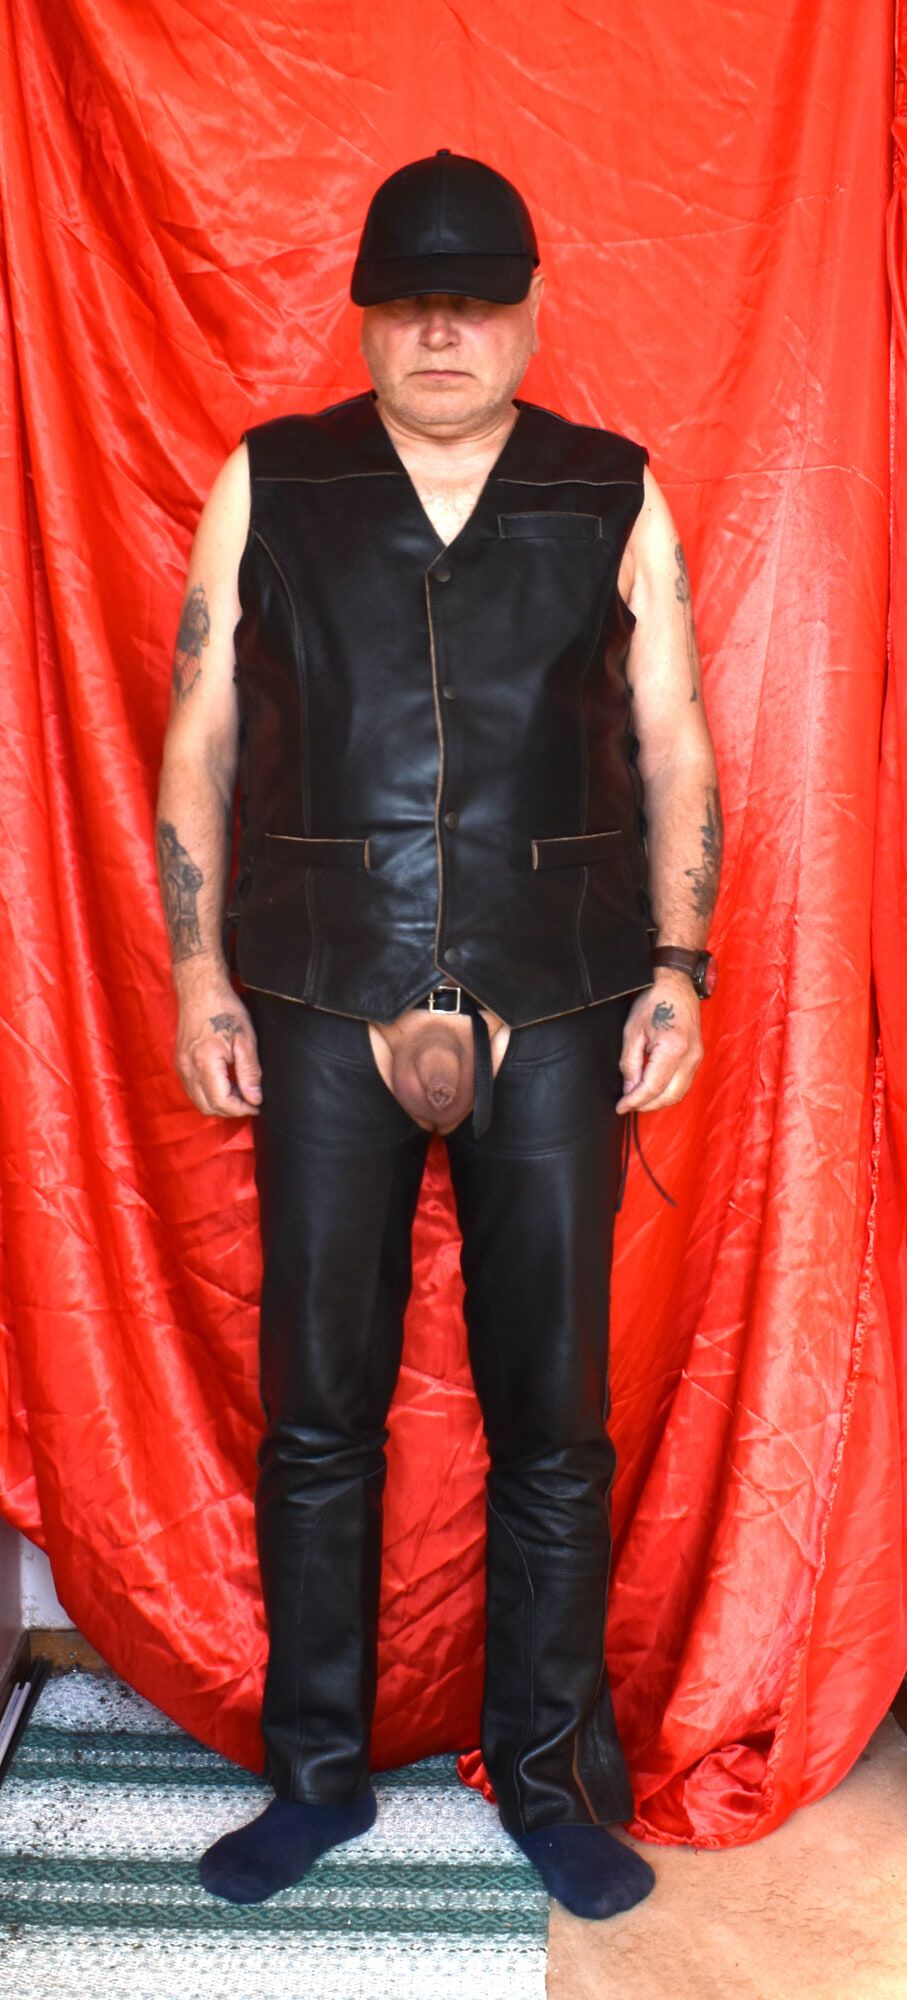 DRESSED IN BLACK TIGHT LEATHER. #5